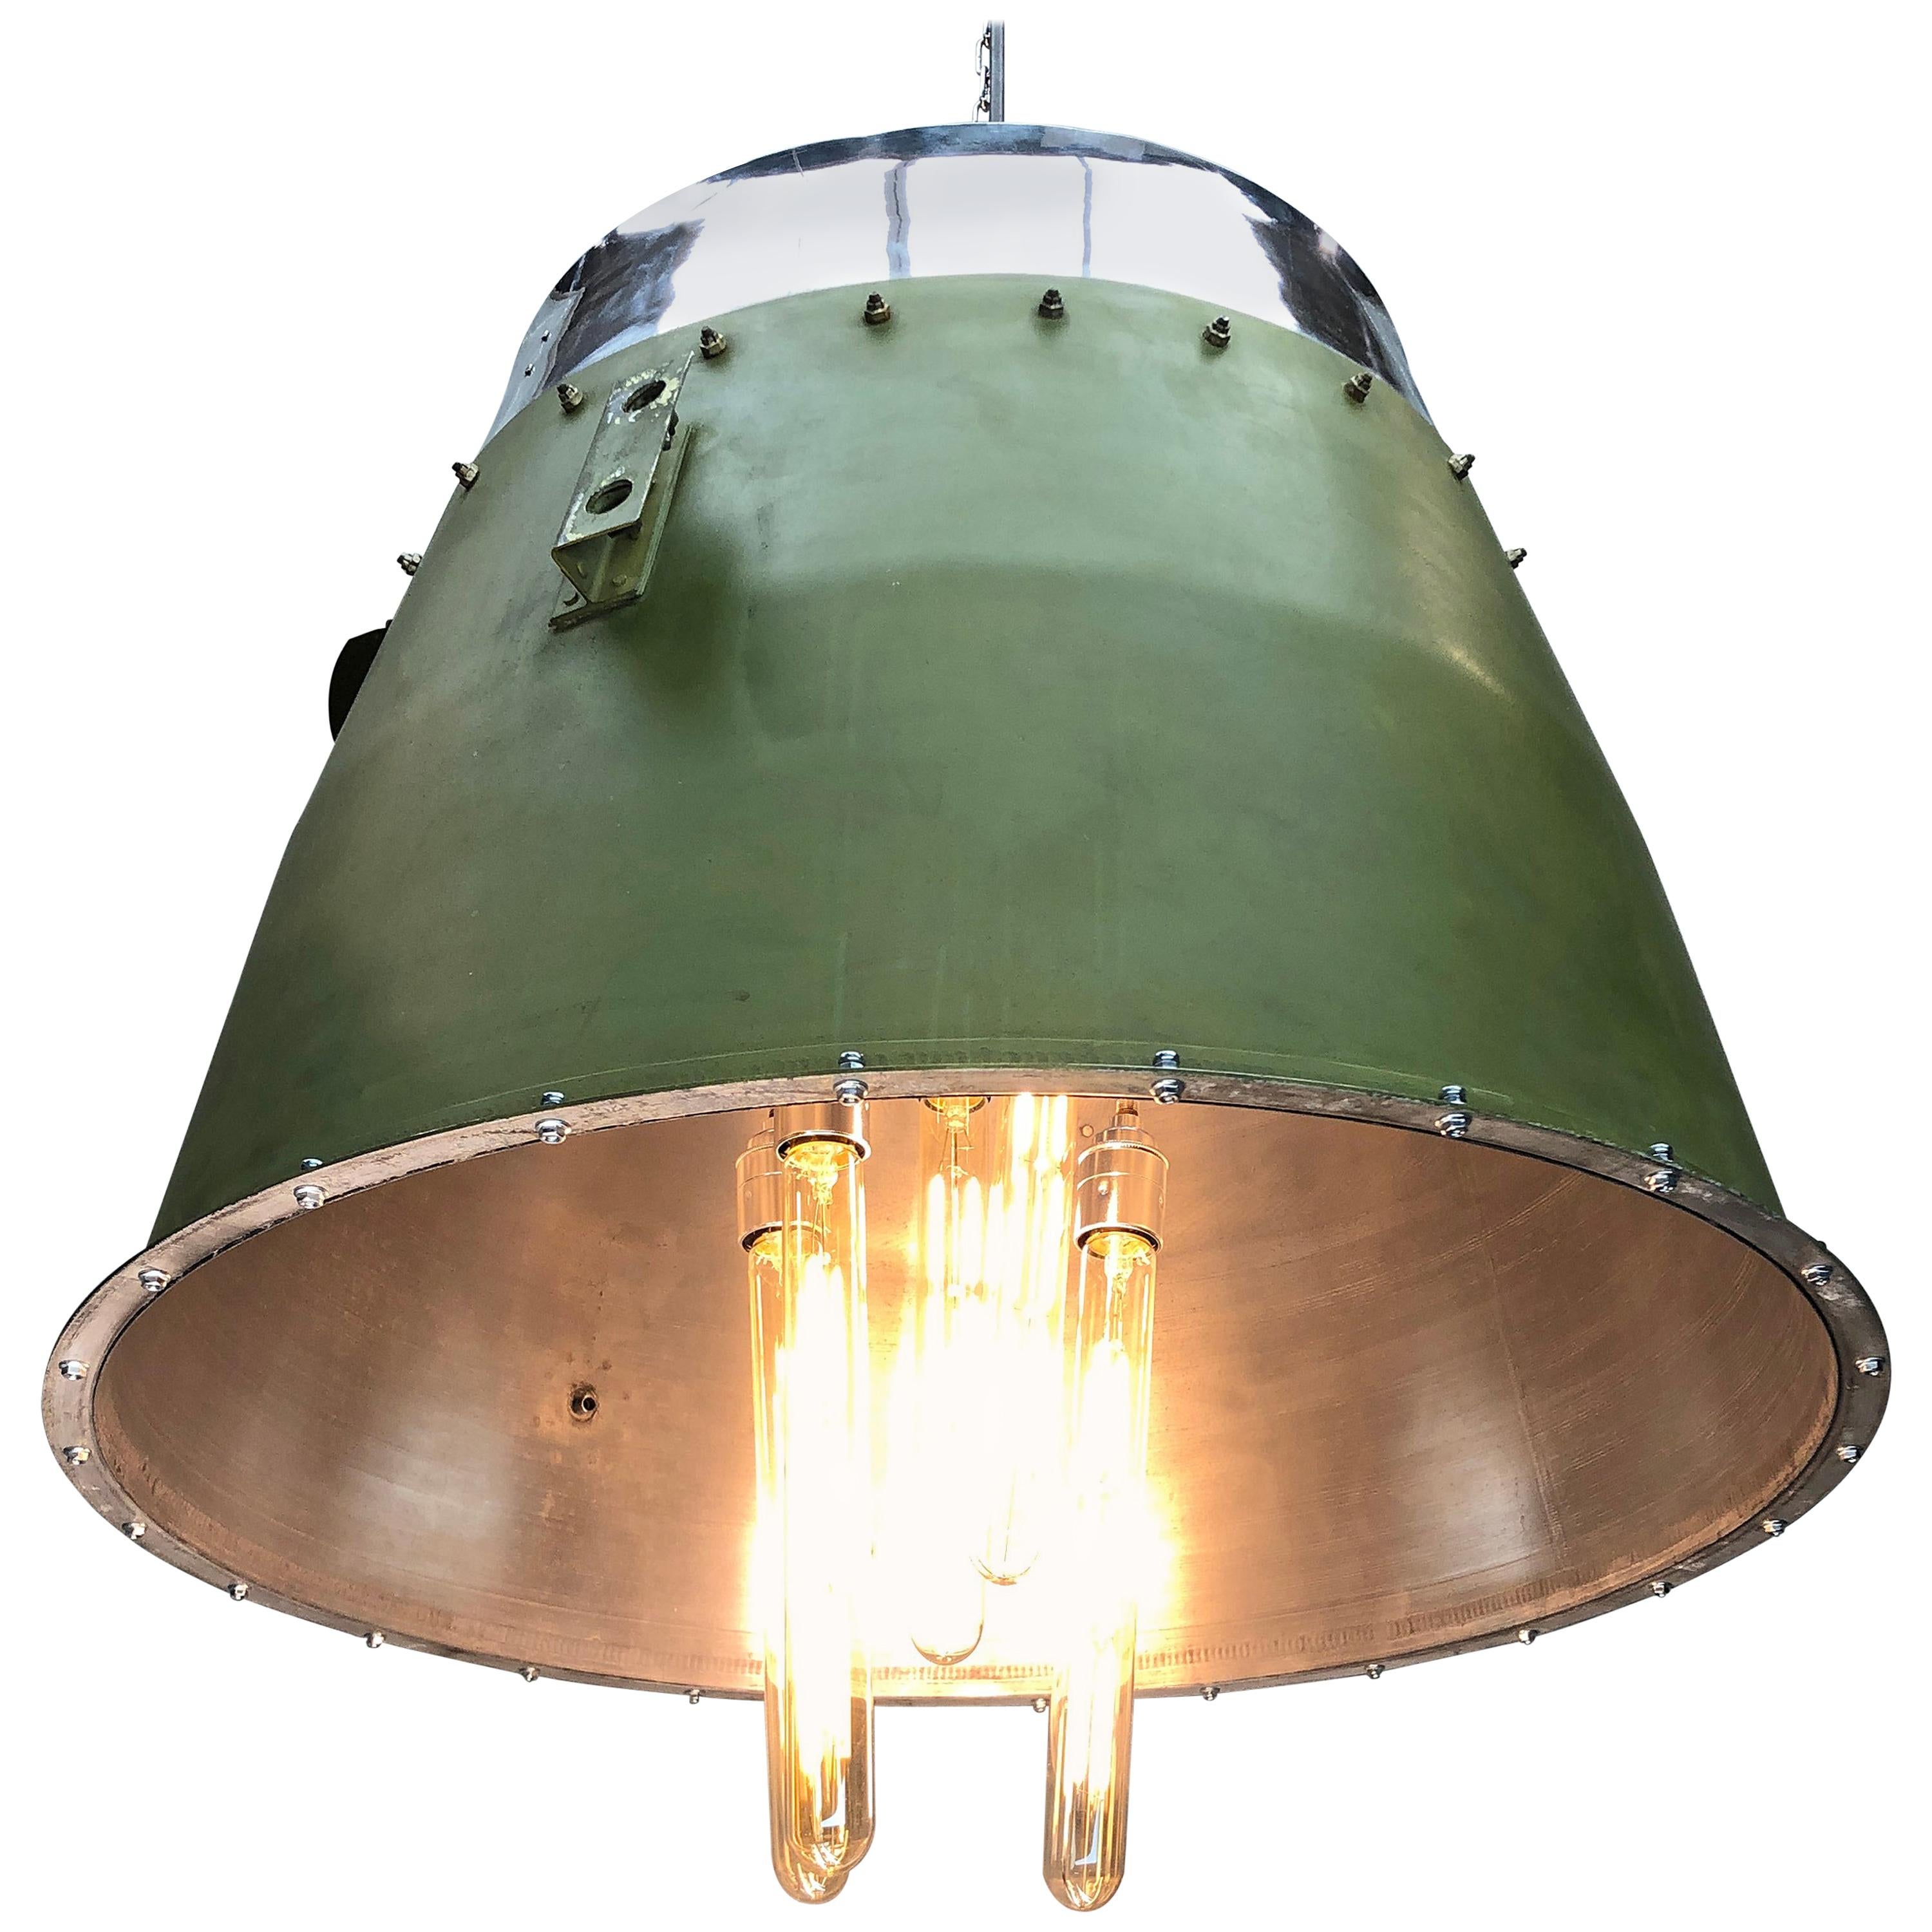 1980s Canadian Bombardier Jet Engine Cowling, Green Industrial Pendant Light